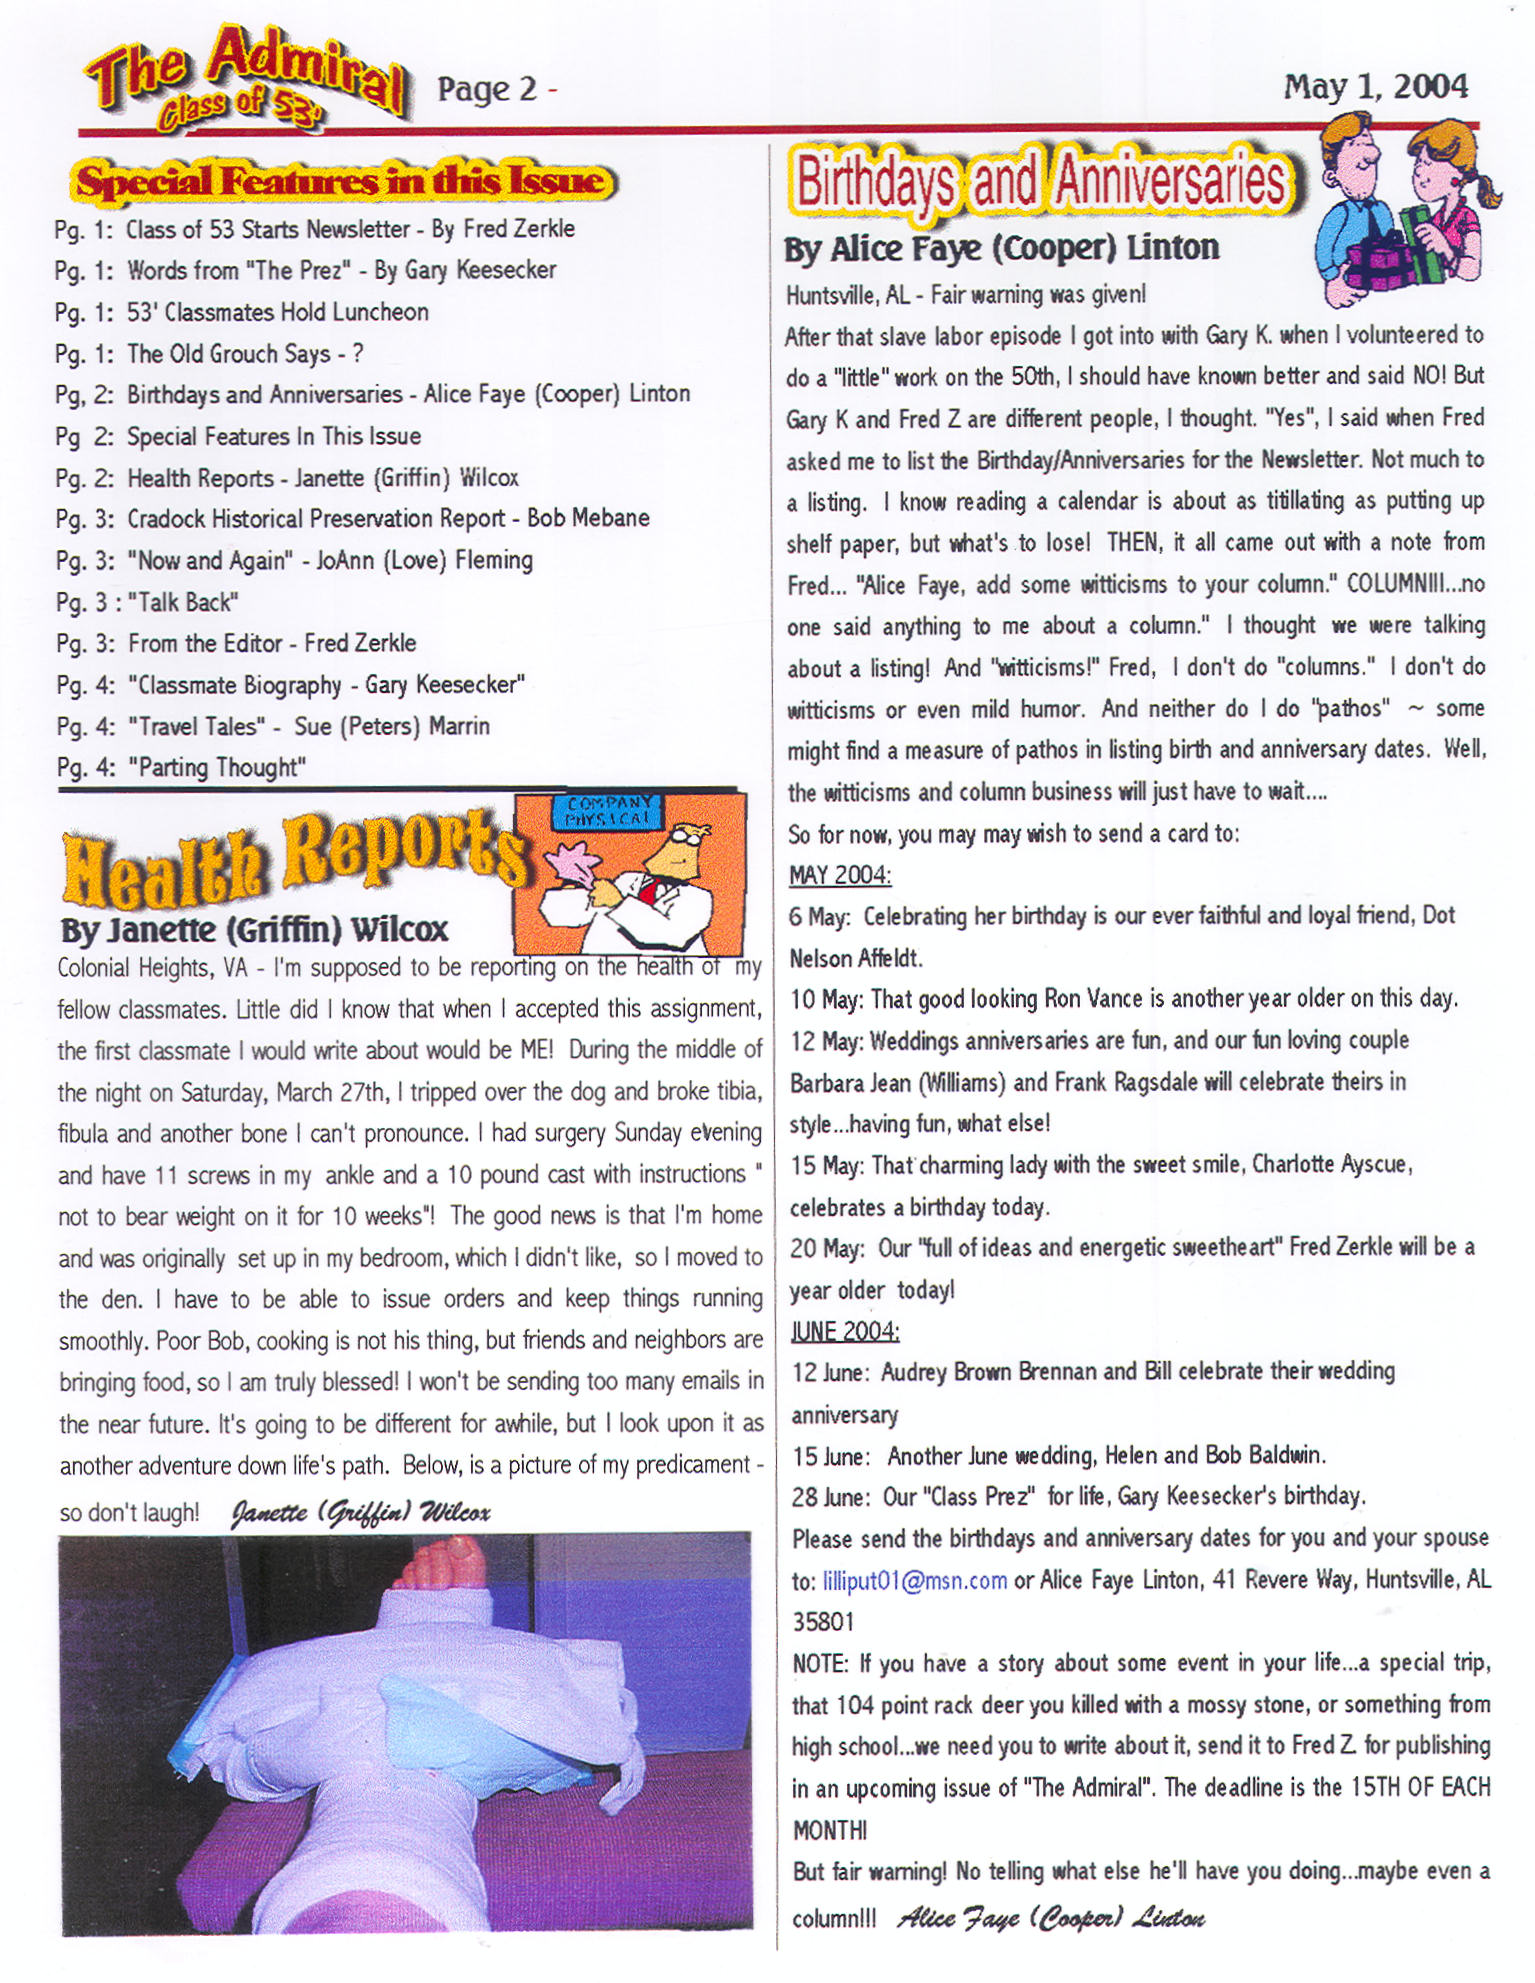 The Admiral - May 2004 - pg. 2